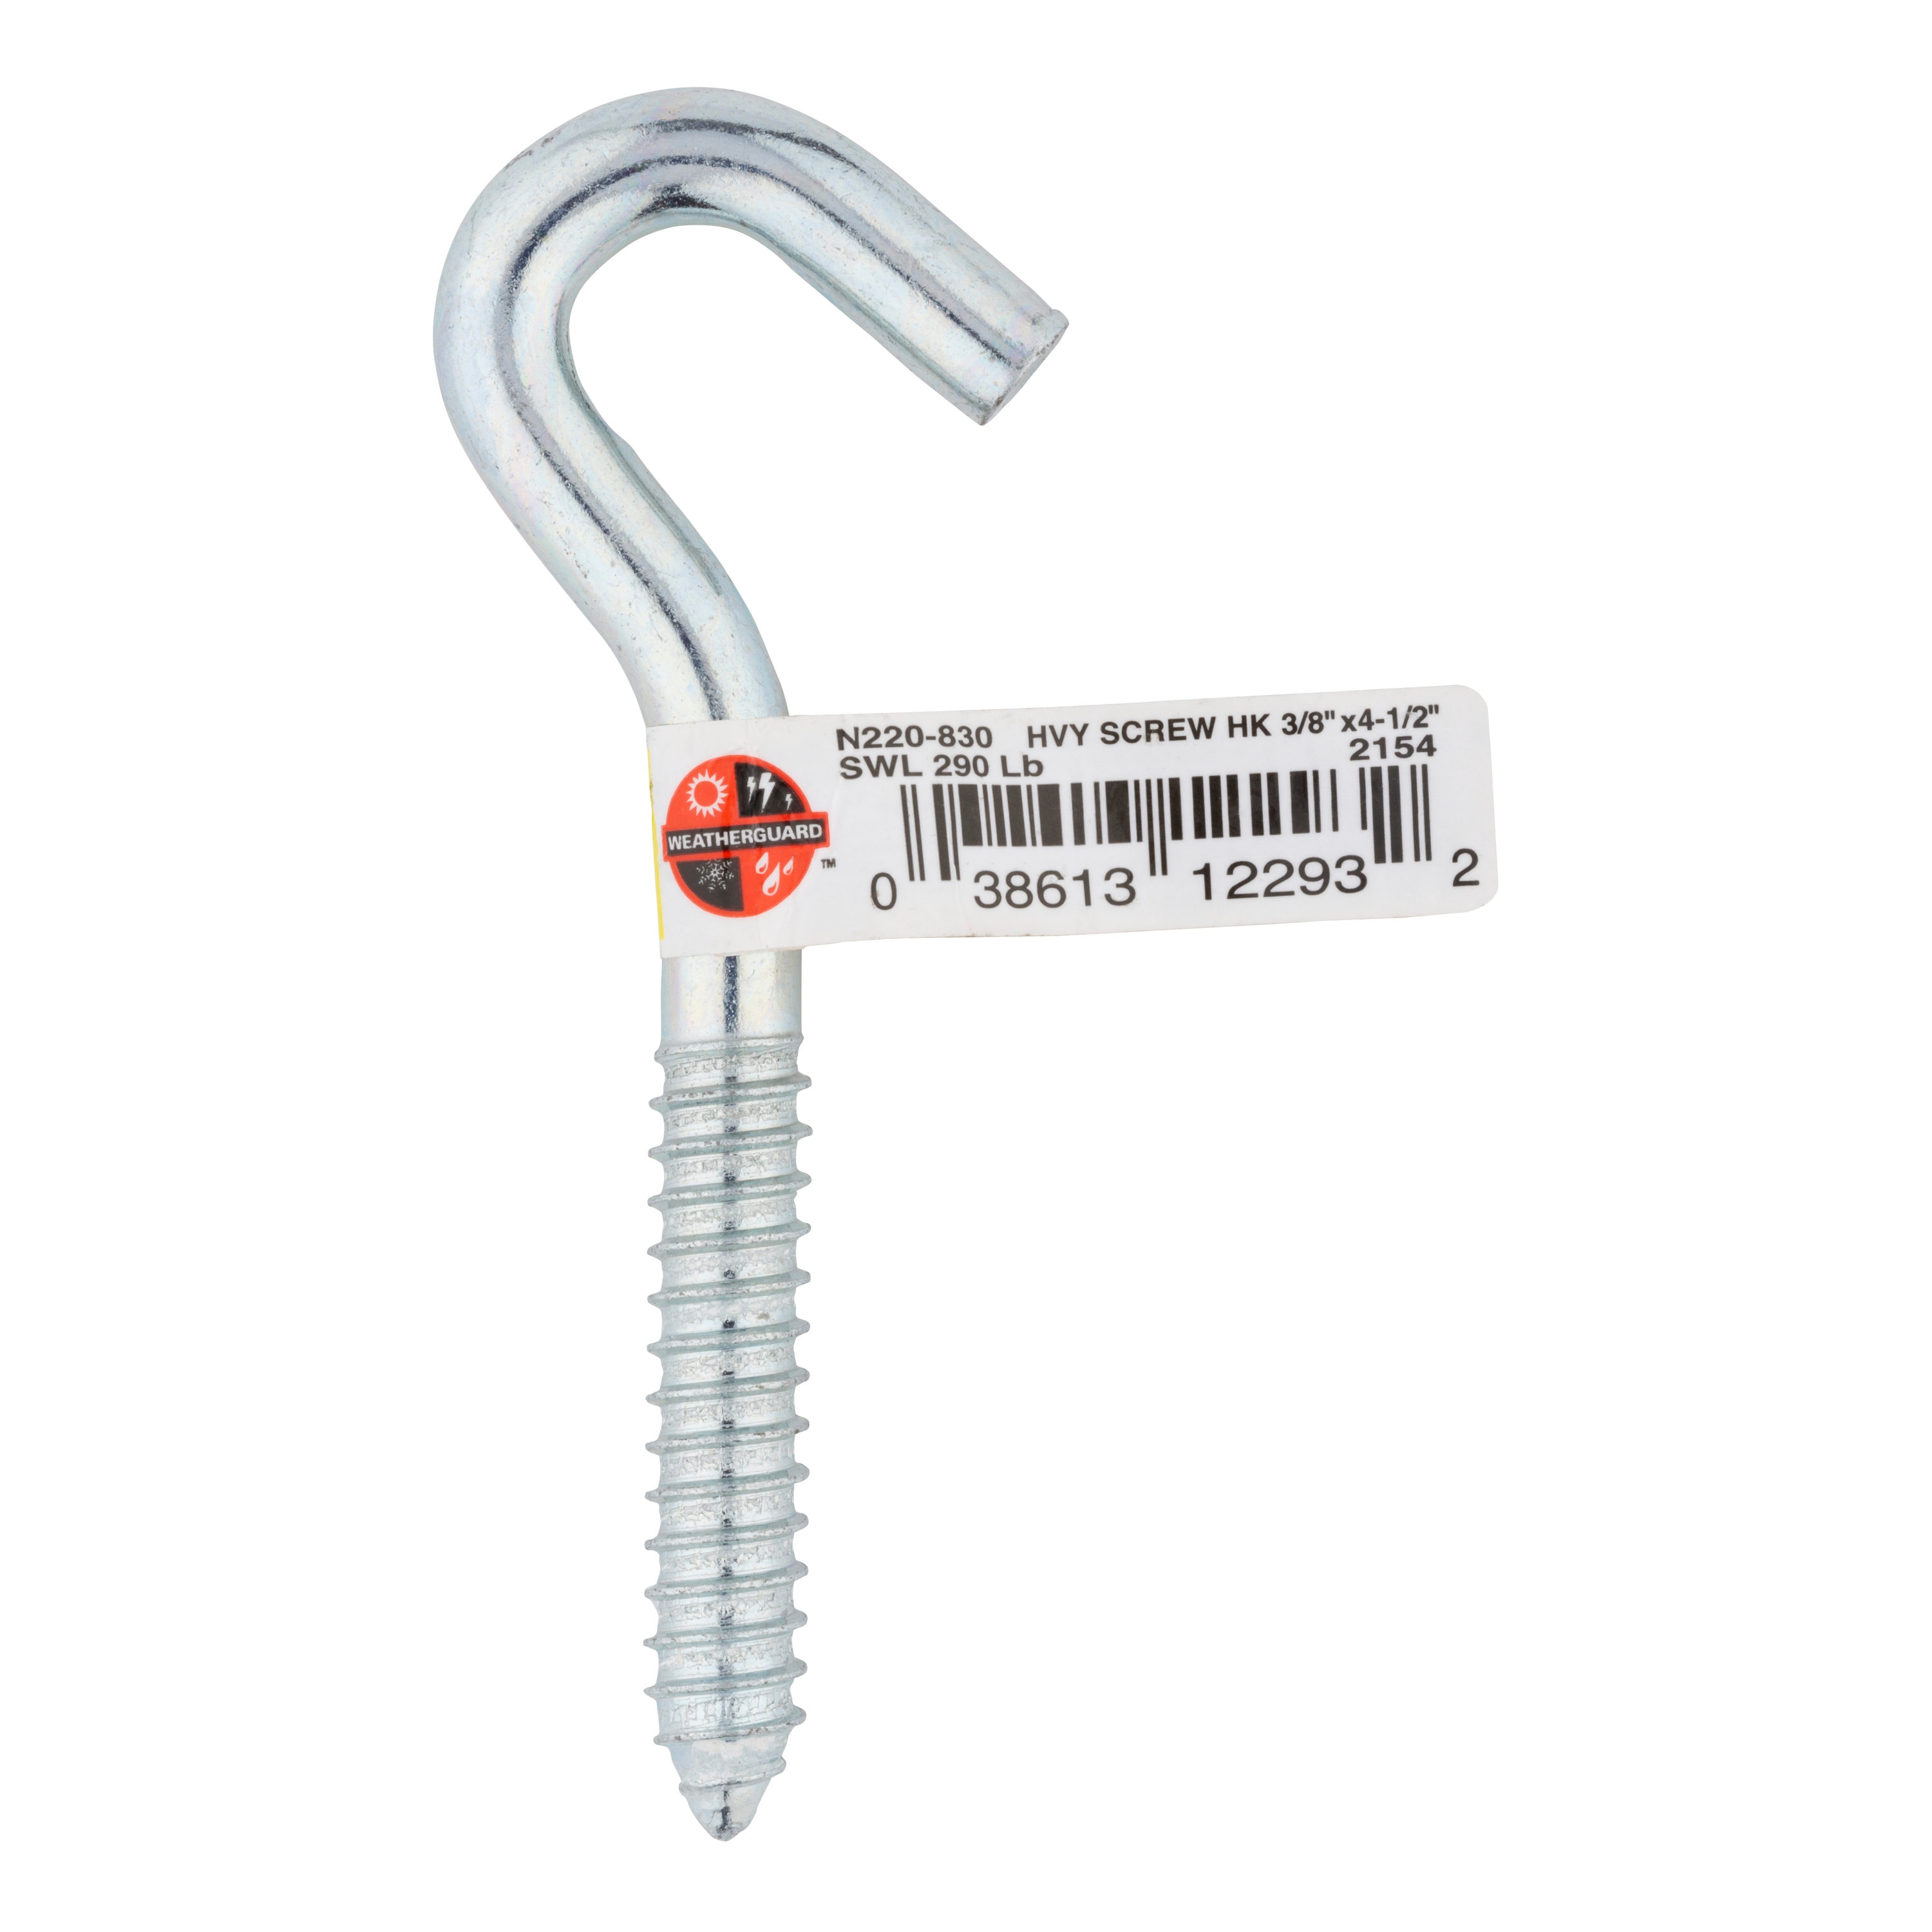 National Hardware 15-Pack Zinc Plated Screw Ceiling Hook (50-lb Capacity)